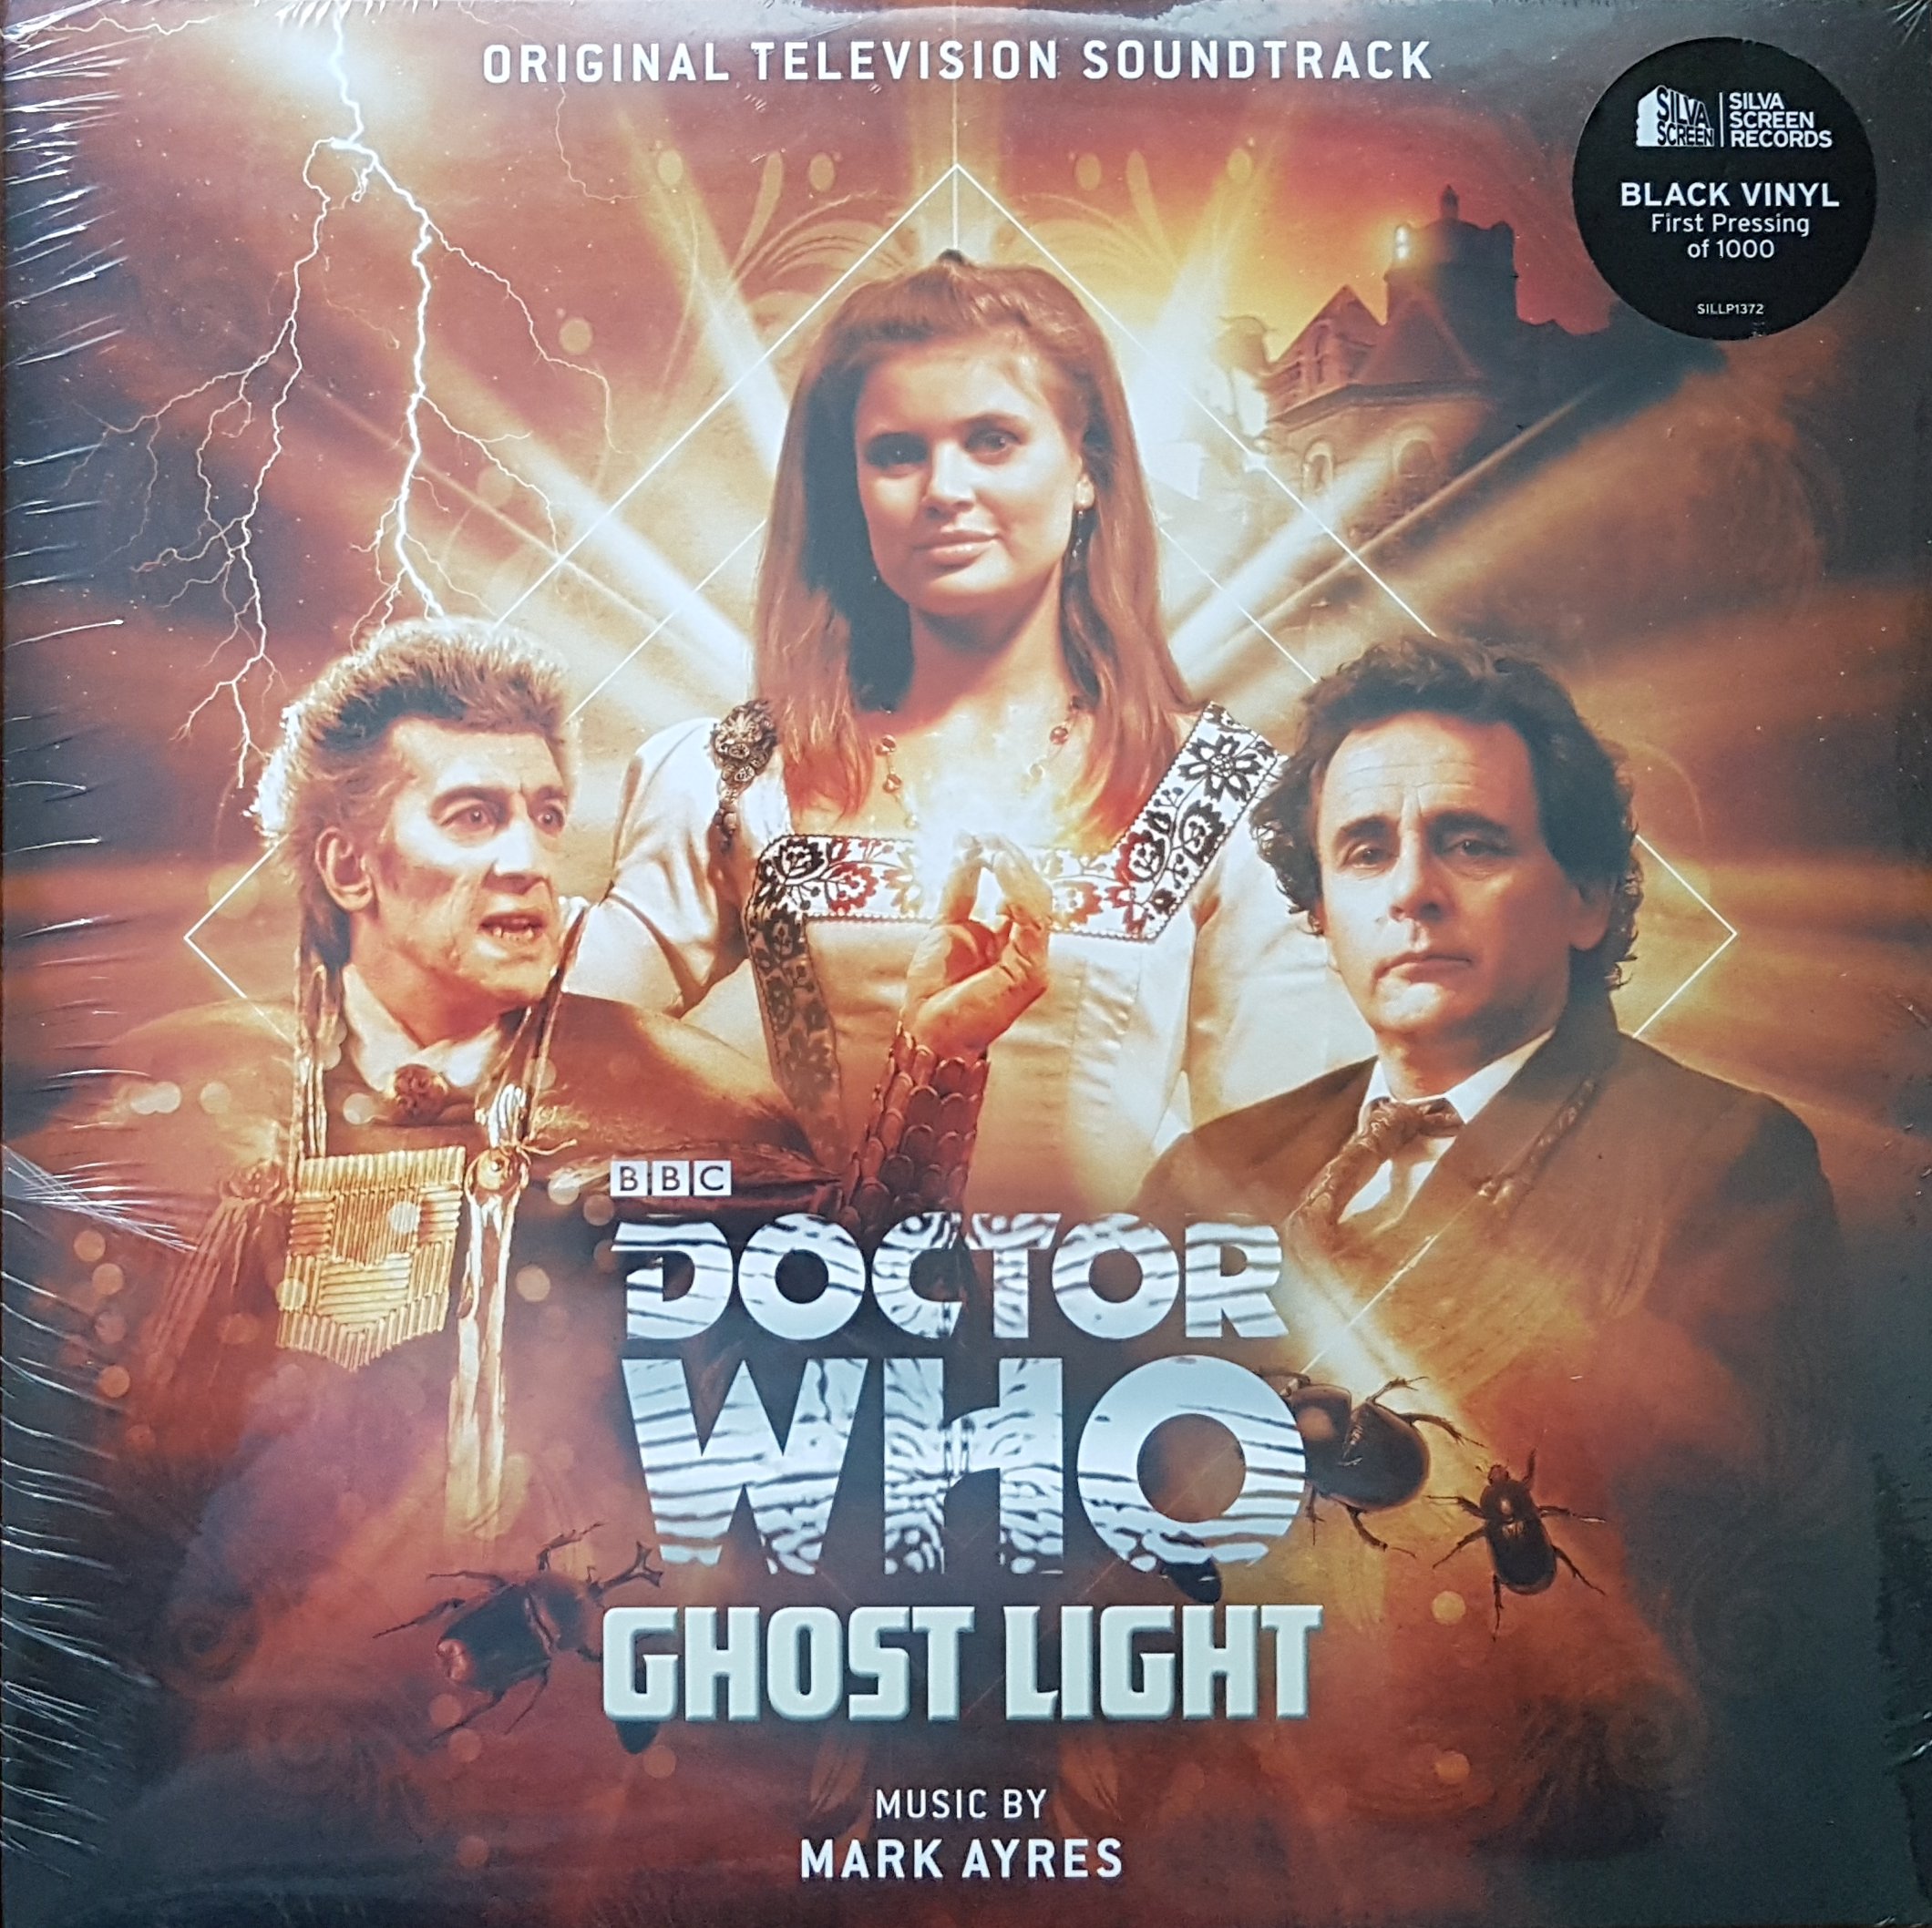 Picture of Doctor Who - Ghost light by artist Mark Ayres from the BBC albums - Records and Tapes library